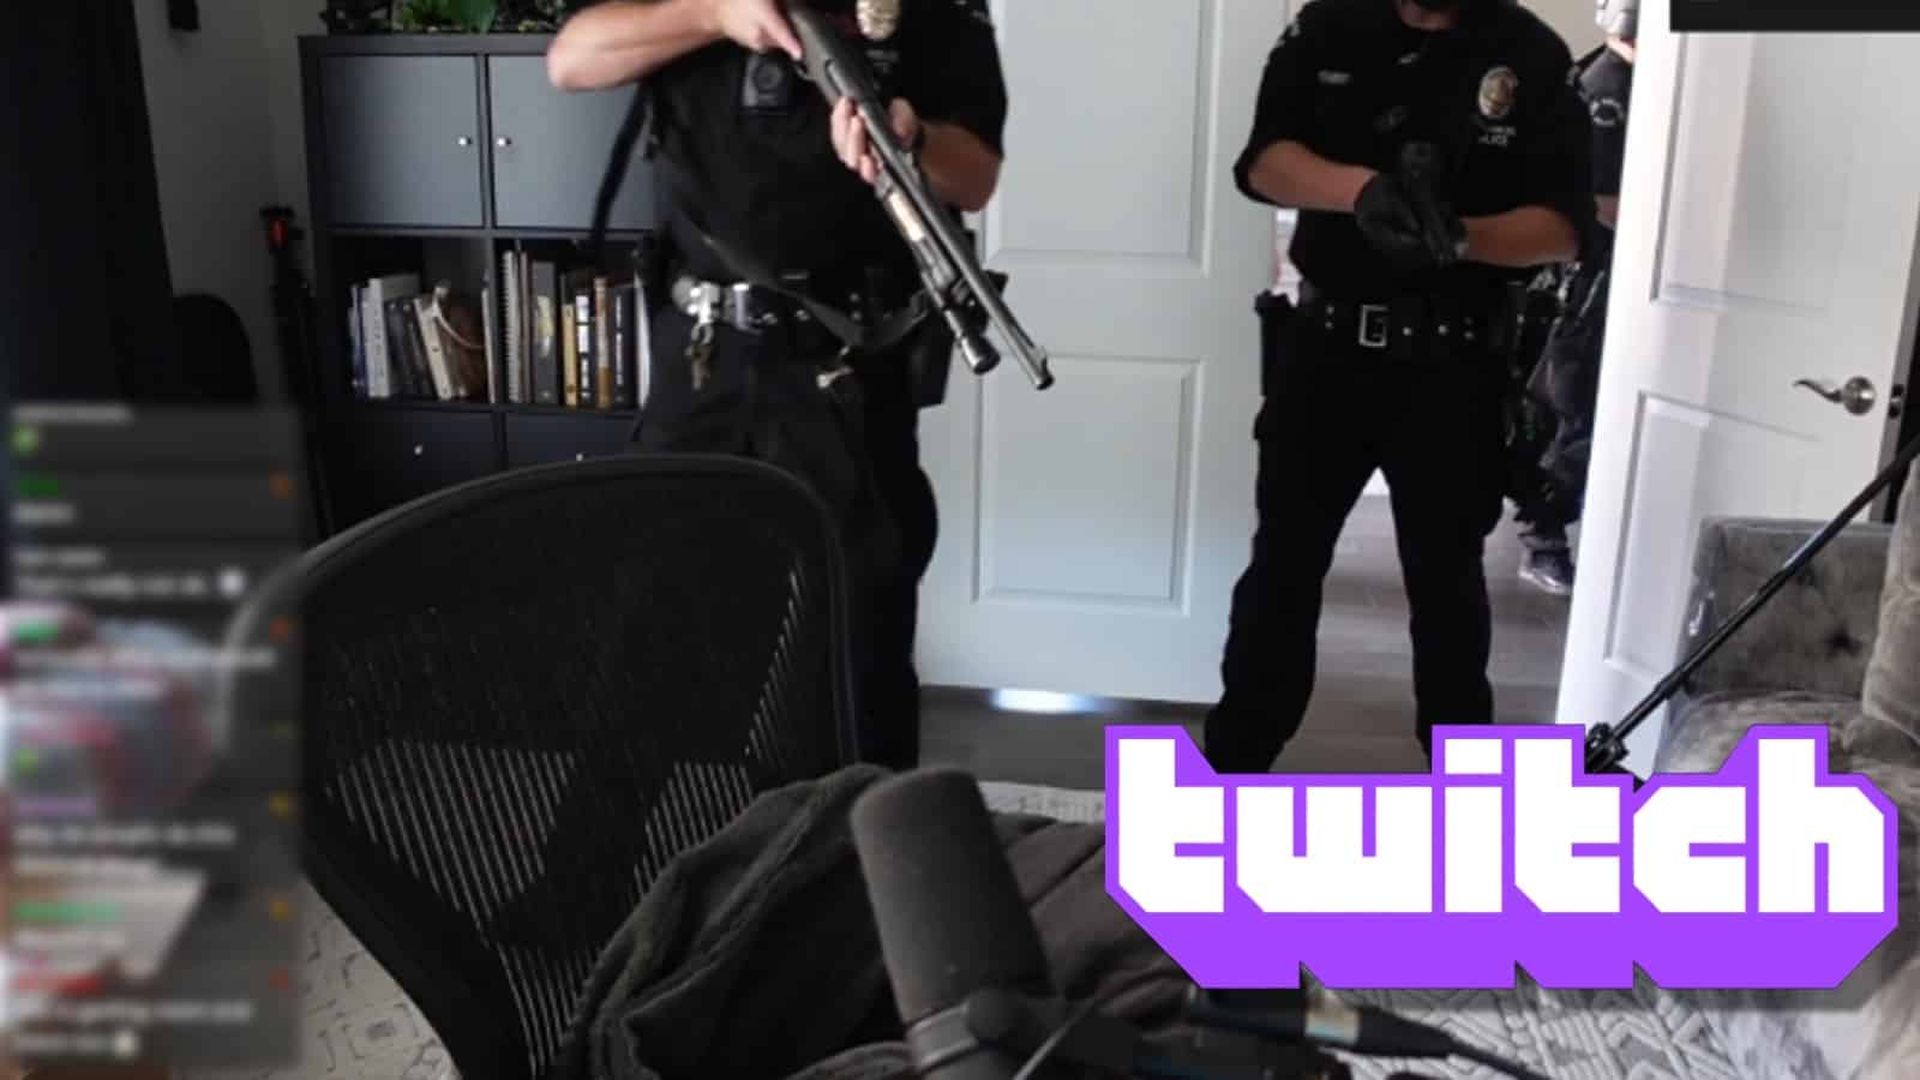 Swatted meaning Twitch